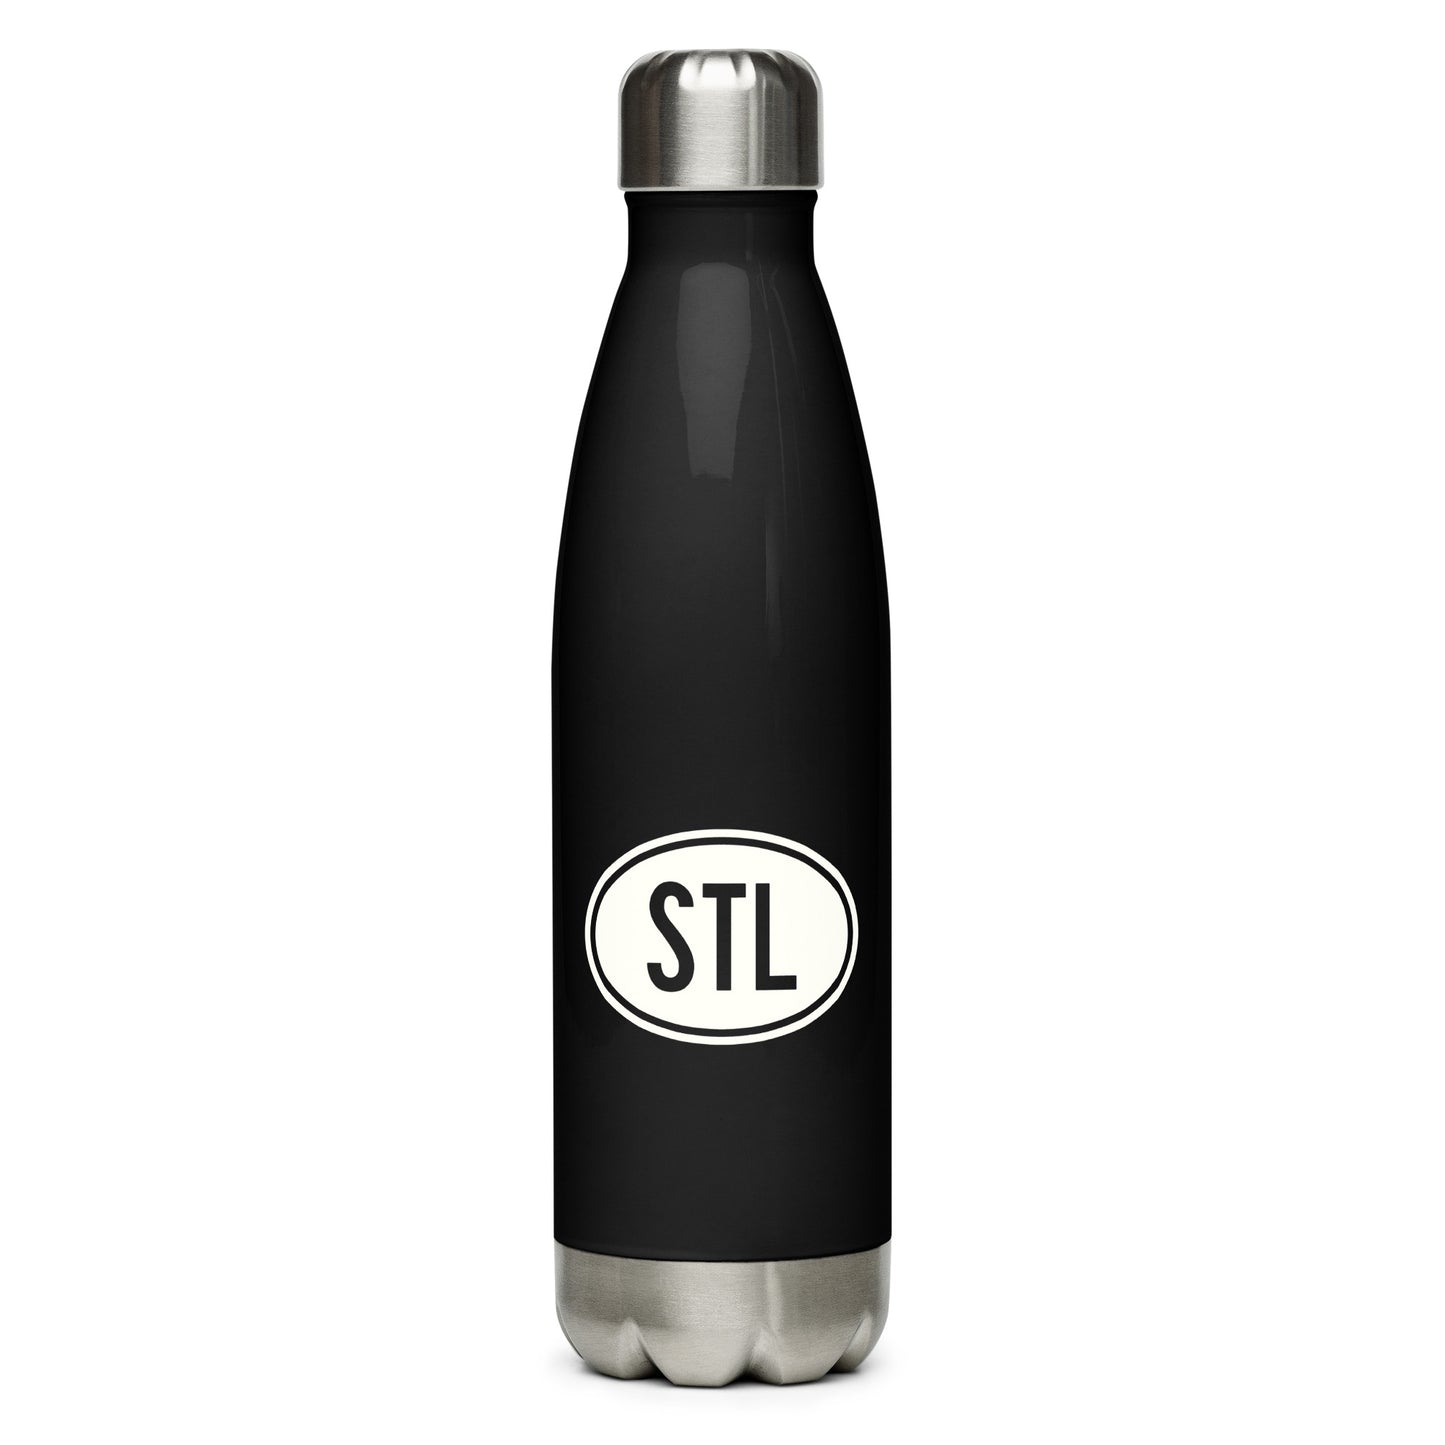 Unique Travel Gift Water Bottle - White Oval • STL St. Louis • YHM Designs - Image 01